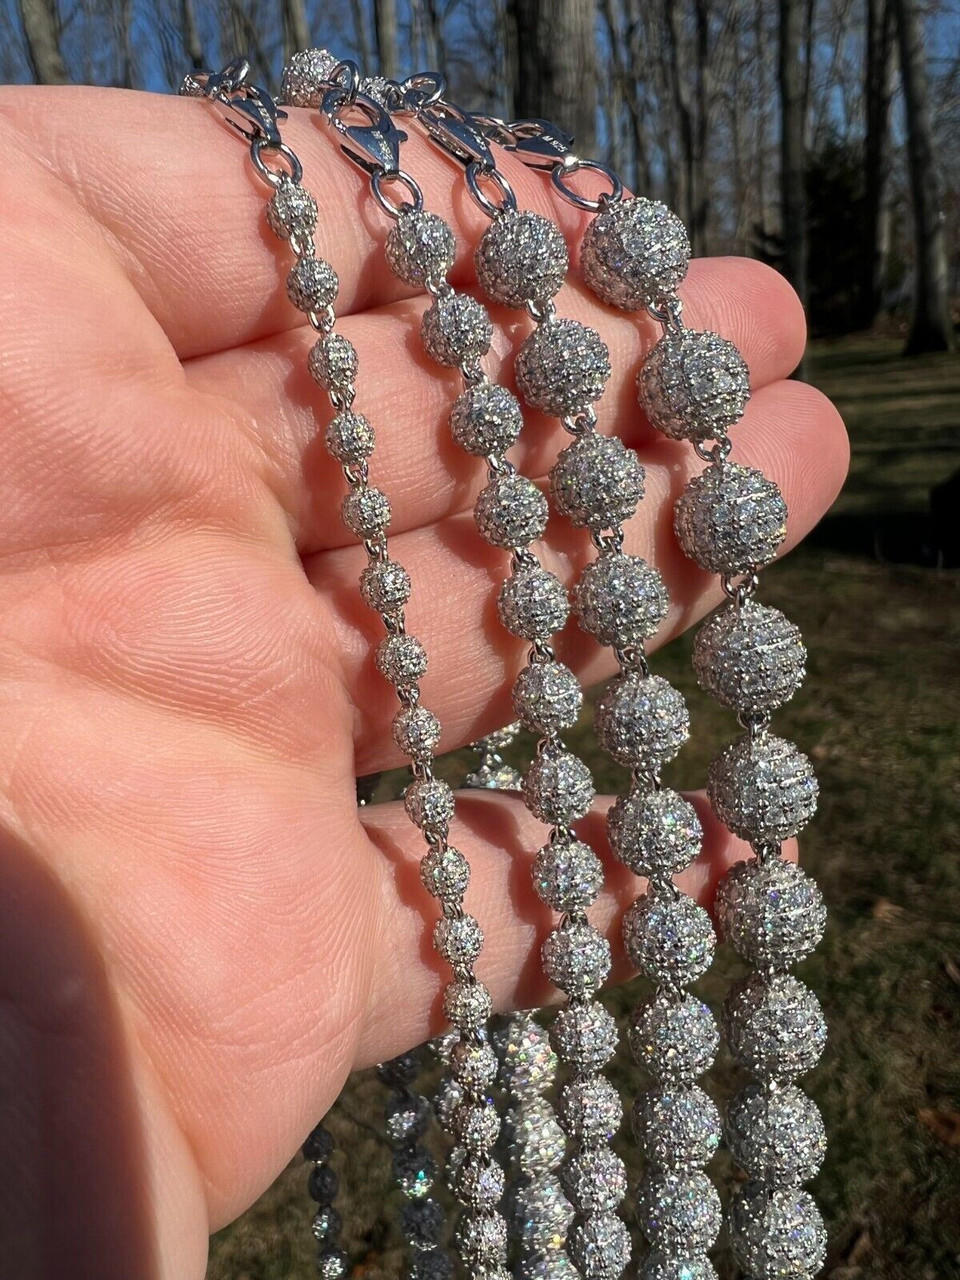 10mm Cluster Diamond Ball Chain | Beaded Ball Chain Necklace